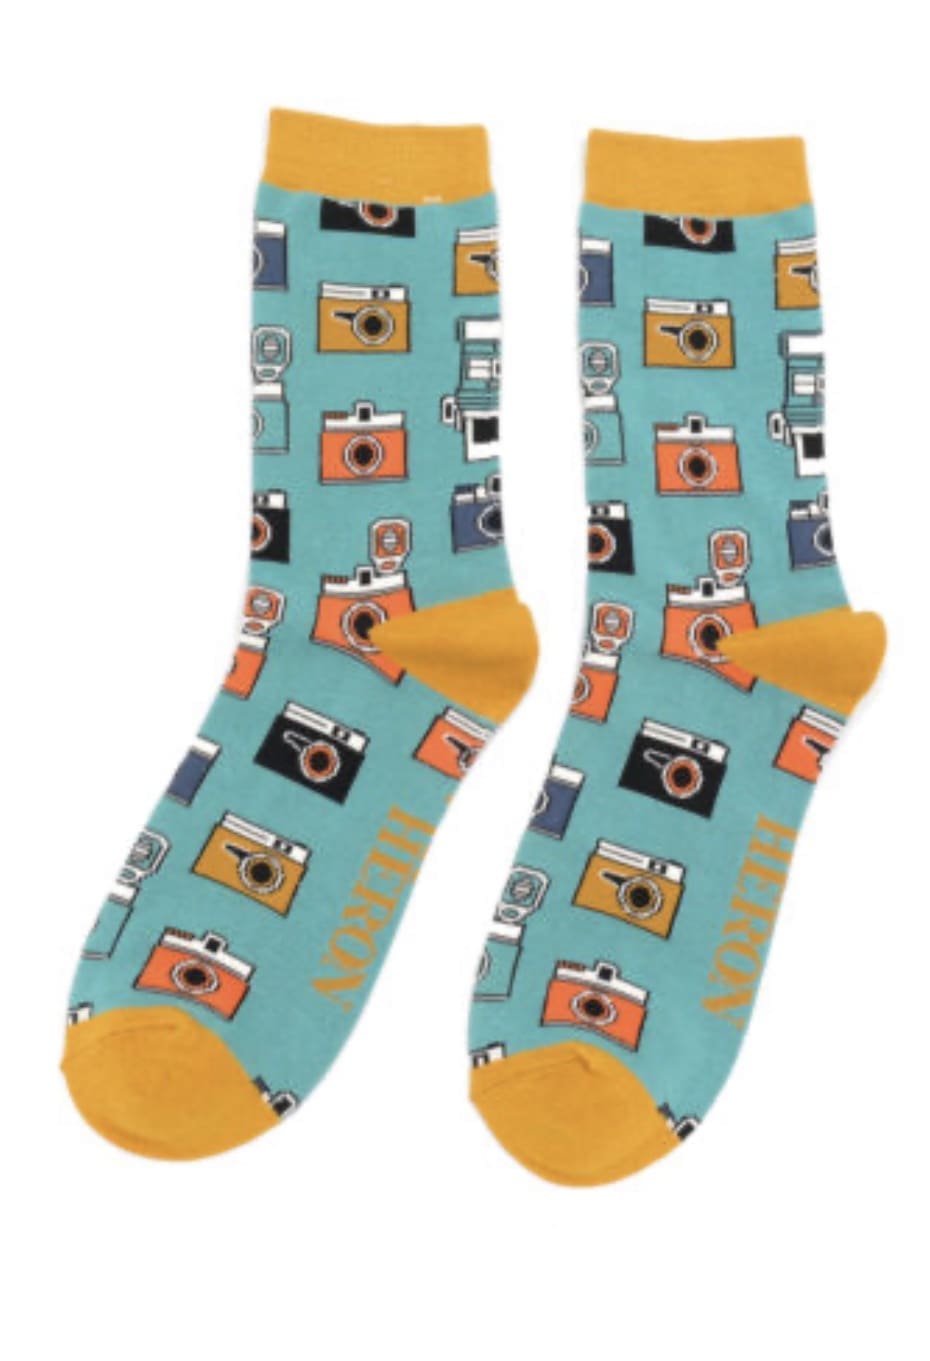 A pair of socks with cameras on them.